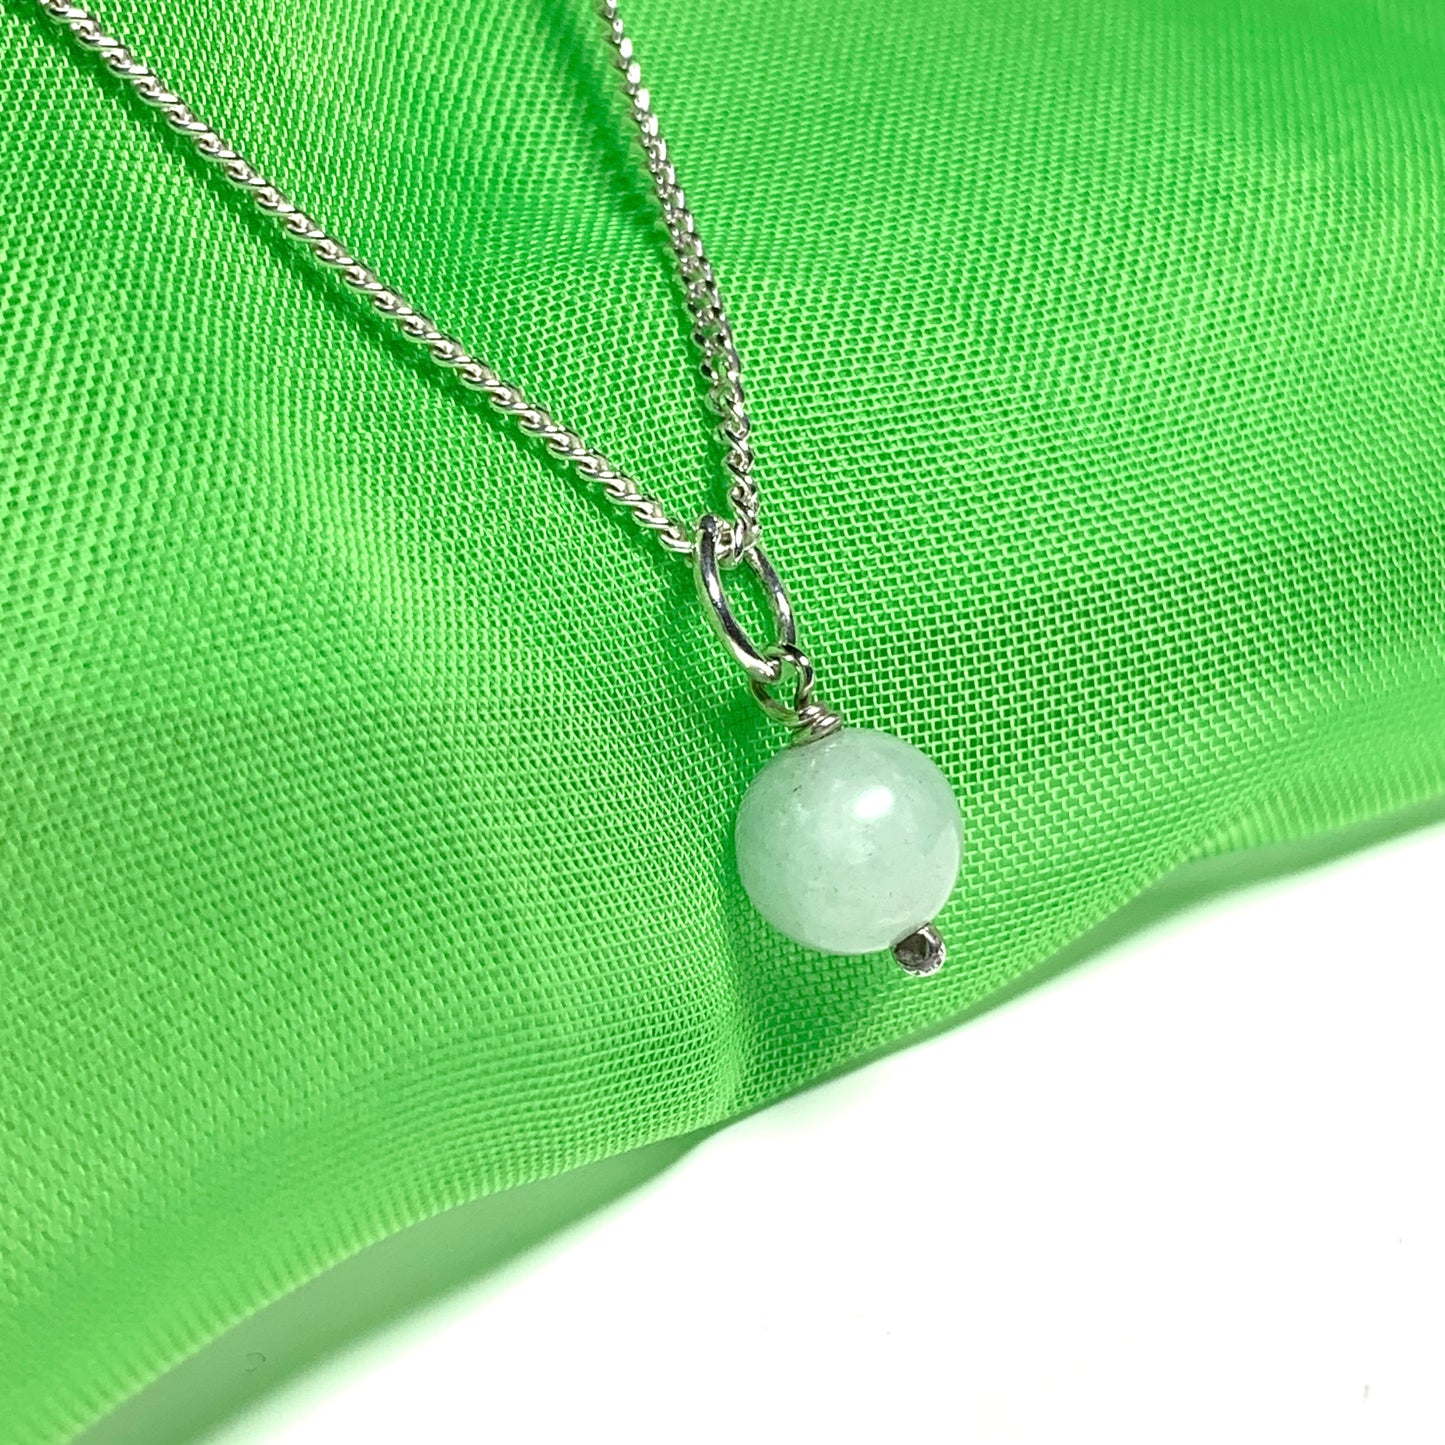 Jade pendant necklace round ball shaped green